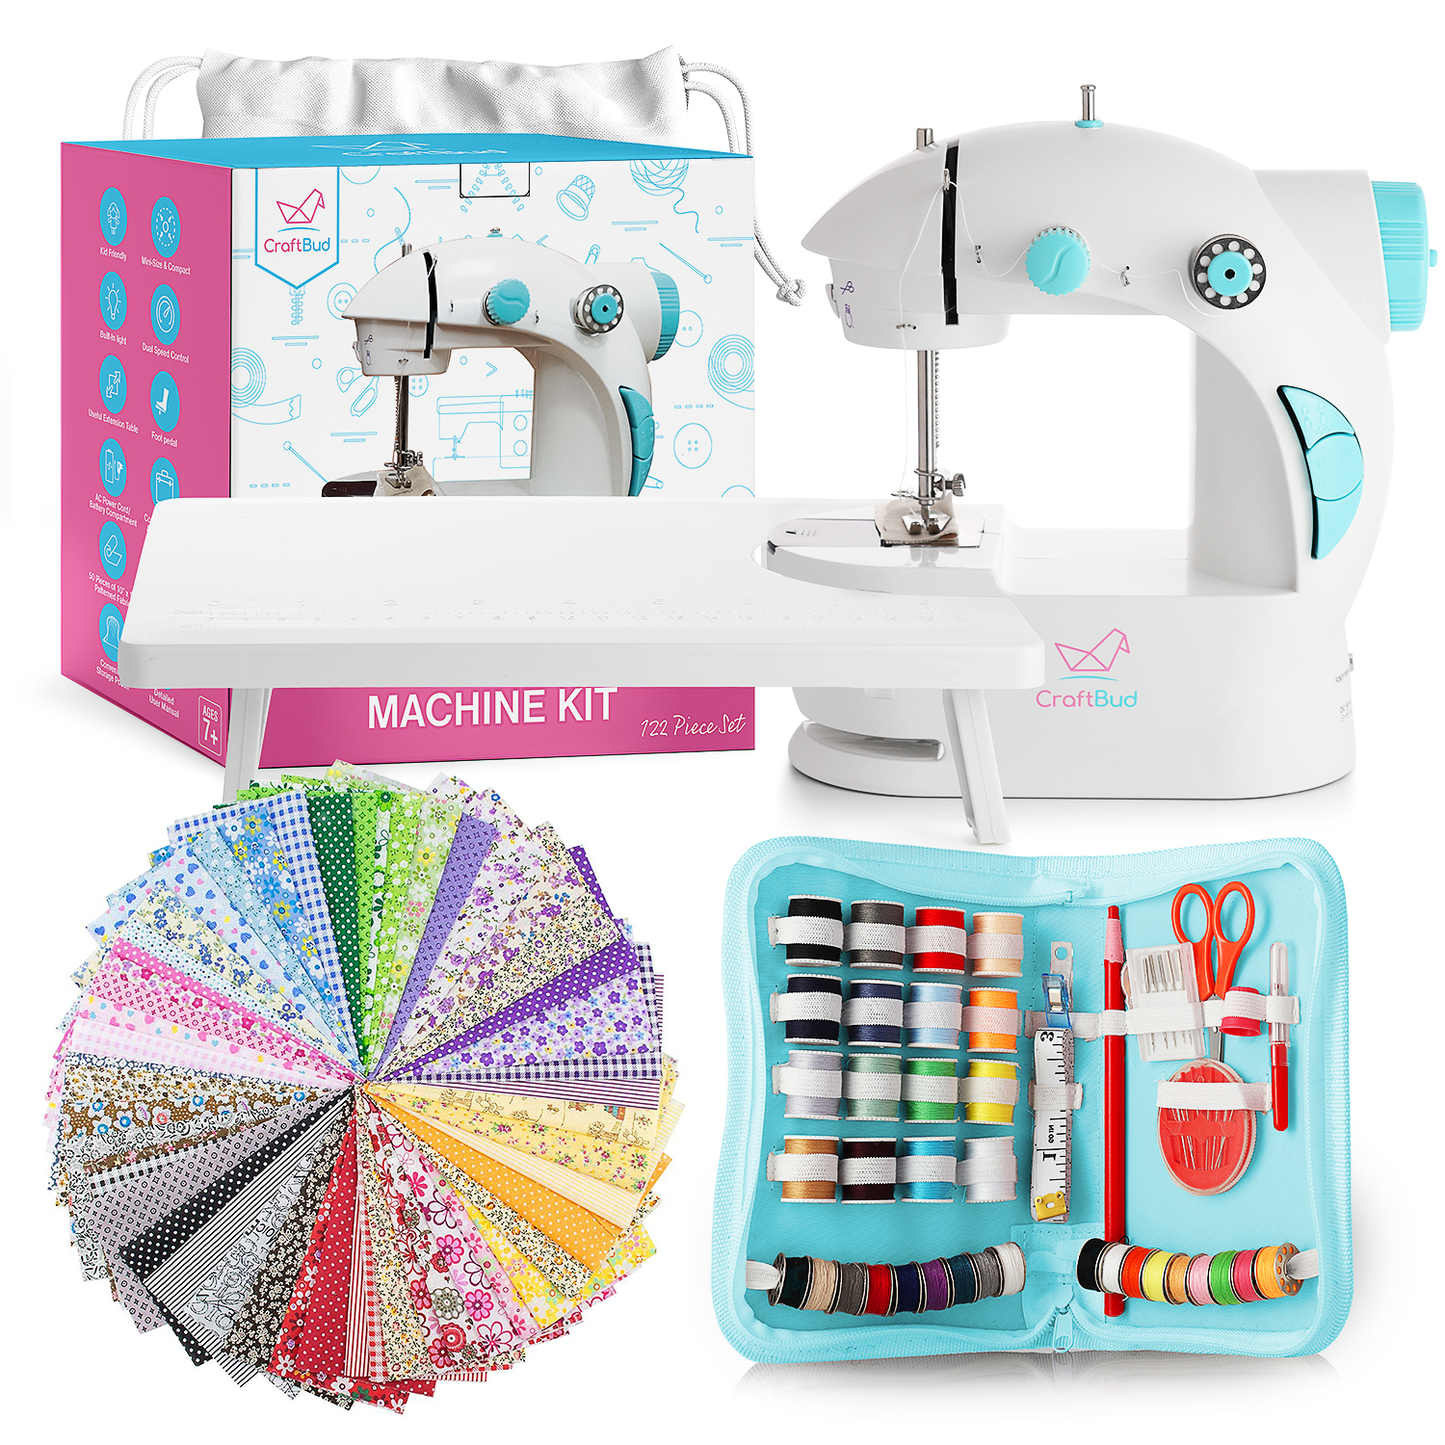 Children Sewing Machine , Portable Battery Powered First Sewing